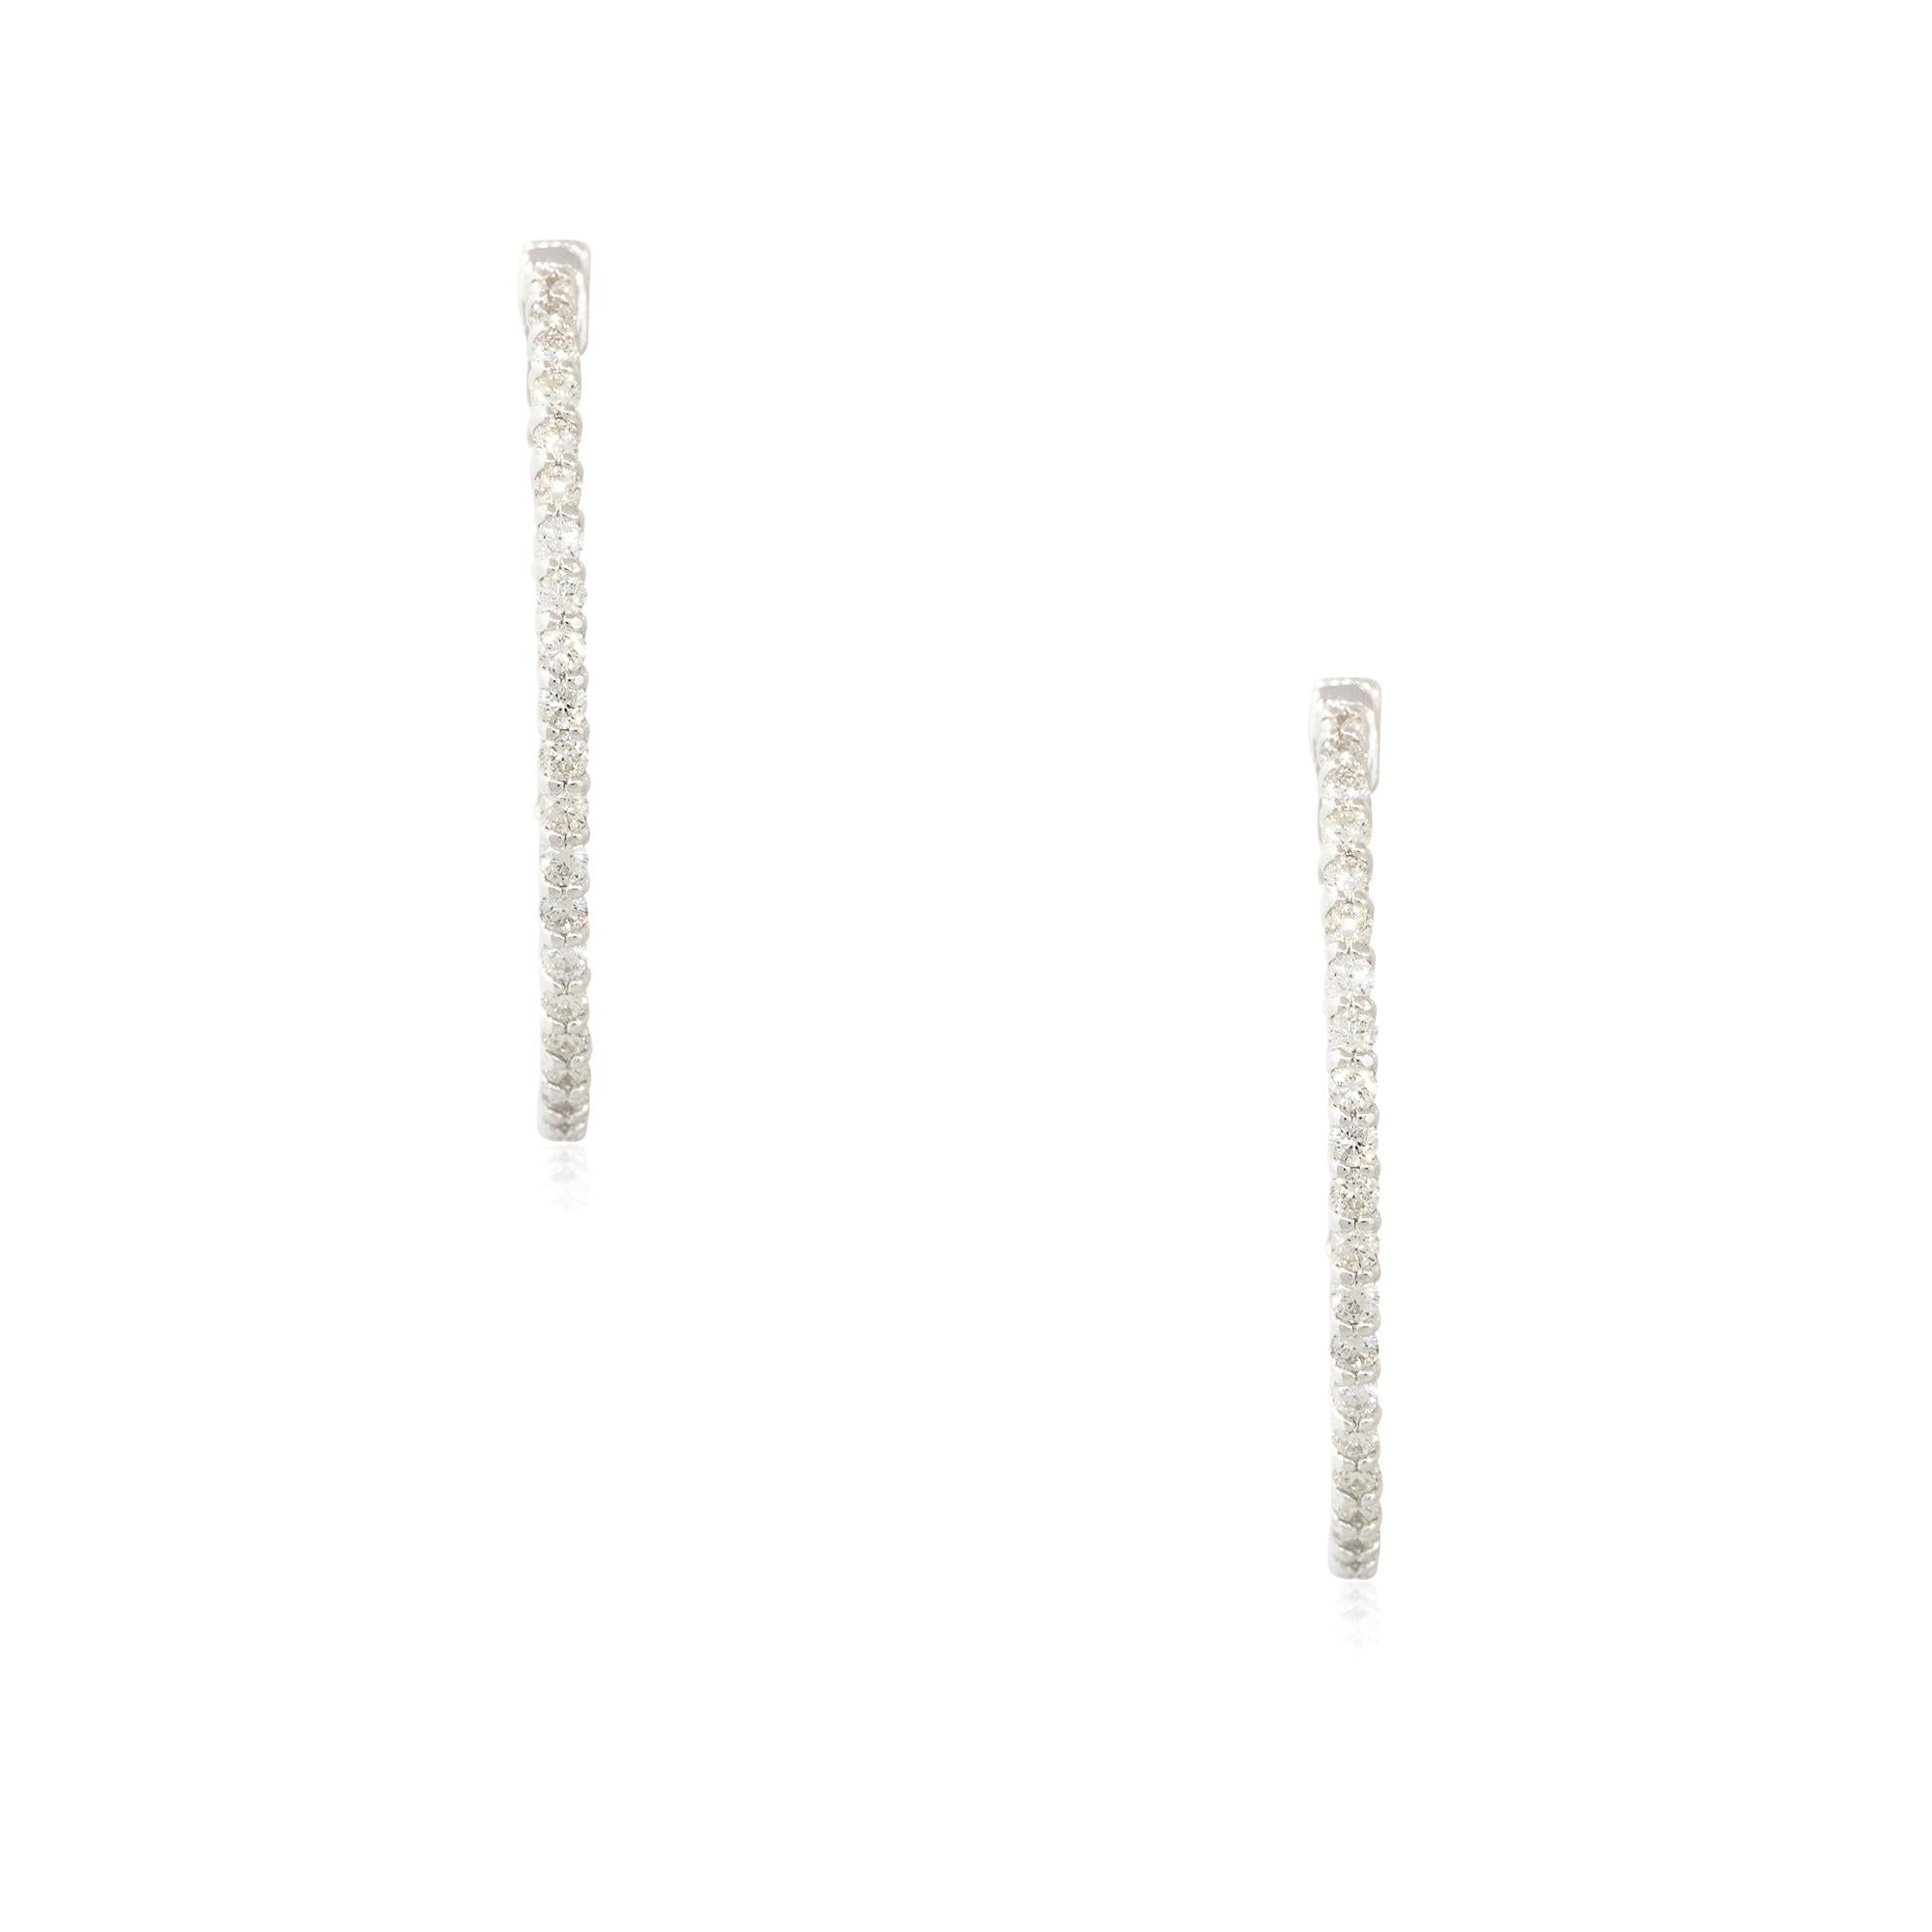 2.12 Carat Diamond Inside-Out Oval Hoop Earrings 14 Karat In Stock In Excellent Condition For Sale In Boca Raton, FL